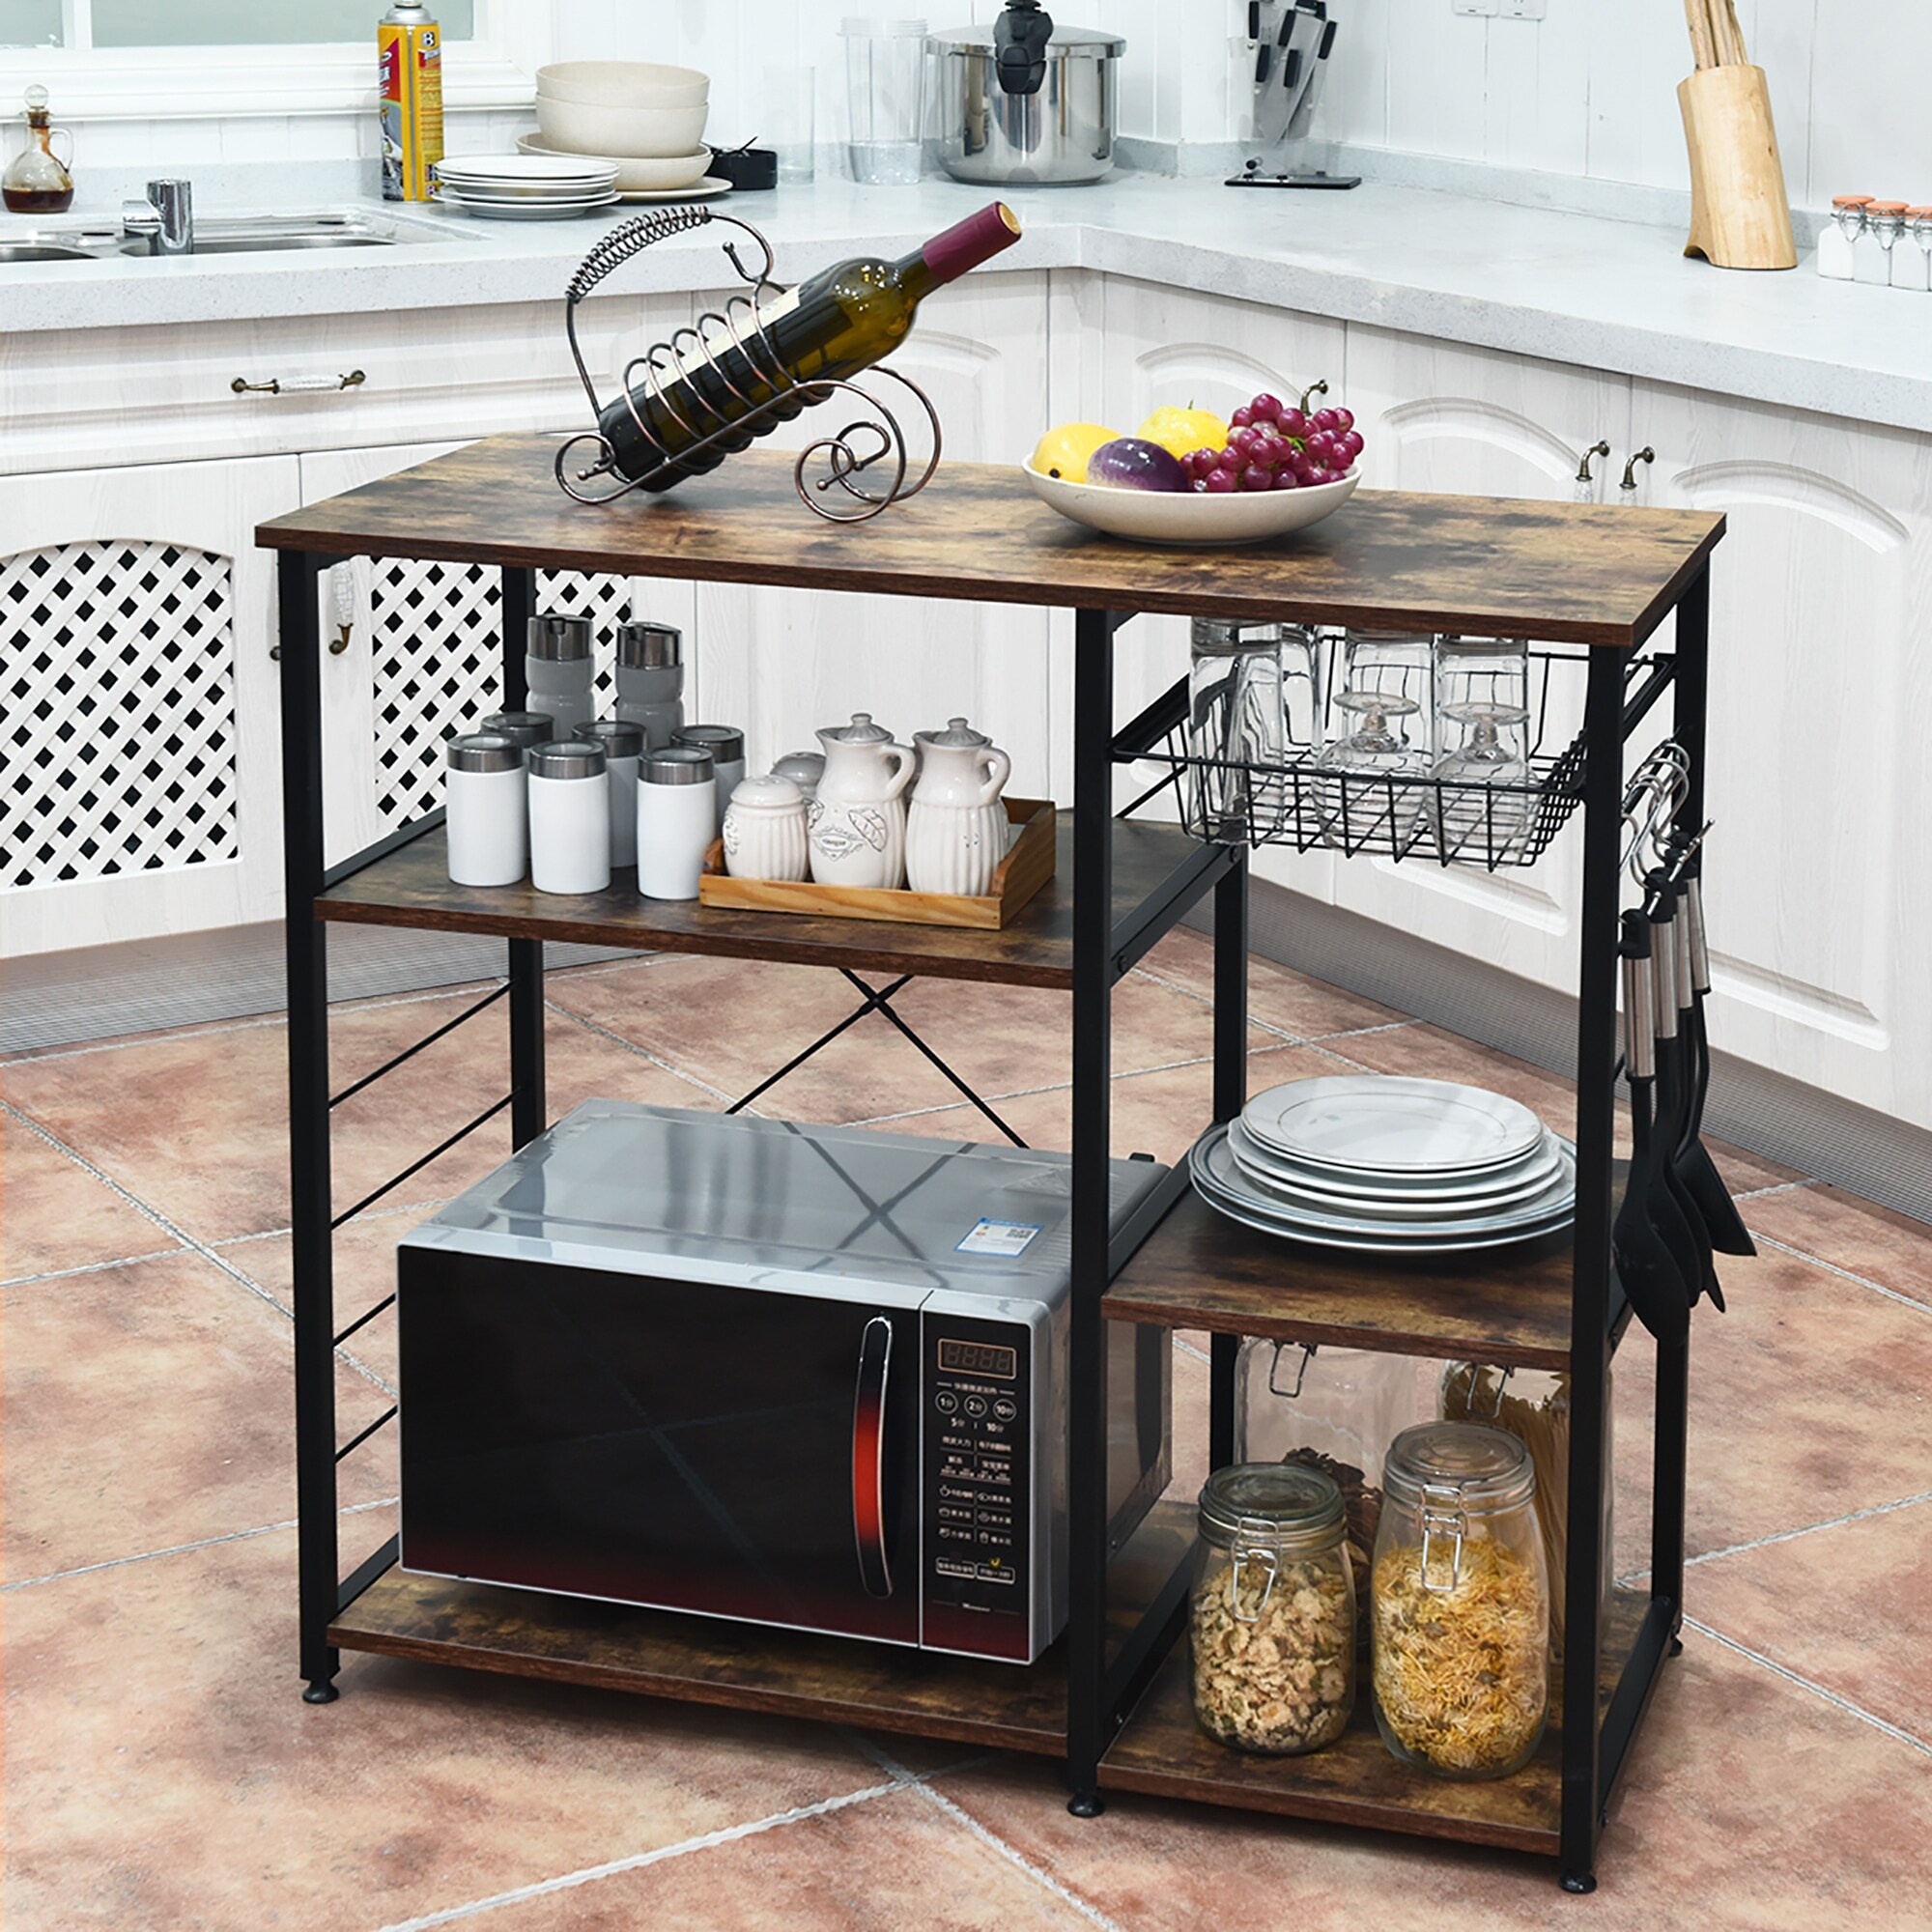 https://ak1.ostkcdn.com/images/products/is/images/direct/d6bf9a425935671bba59472fa4a9f3d191ef1418/Kitchen-Microwave-Stand-Steel-Baker-Storage-Shelf-with-6-Hooks.jpg